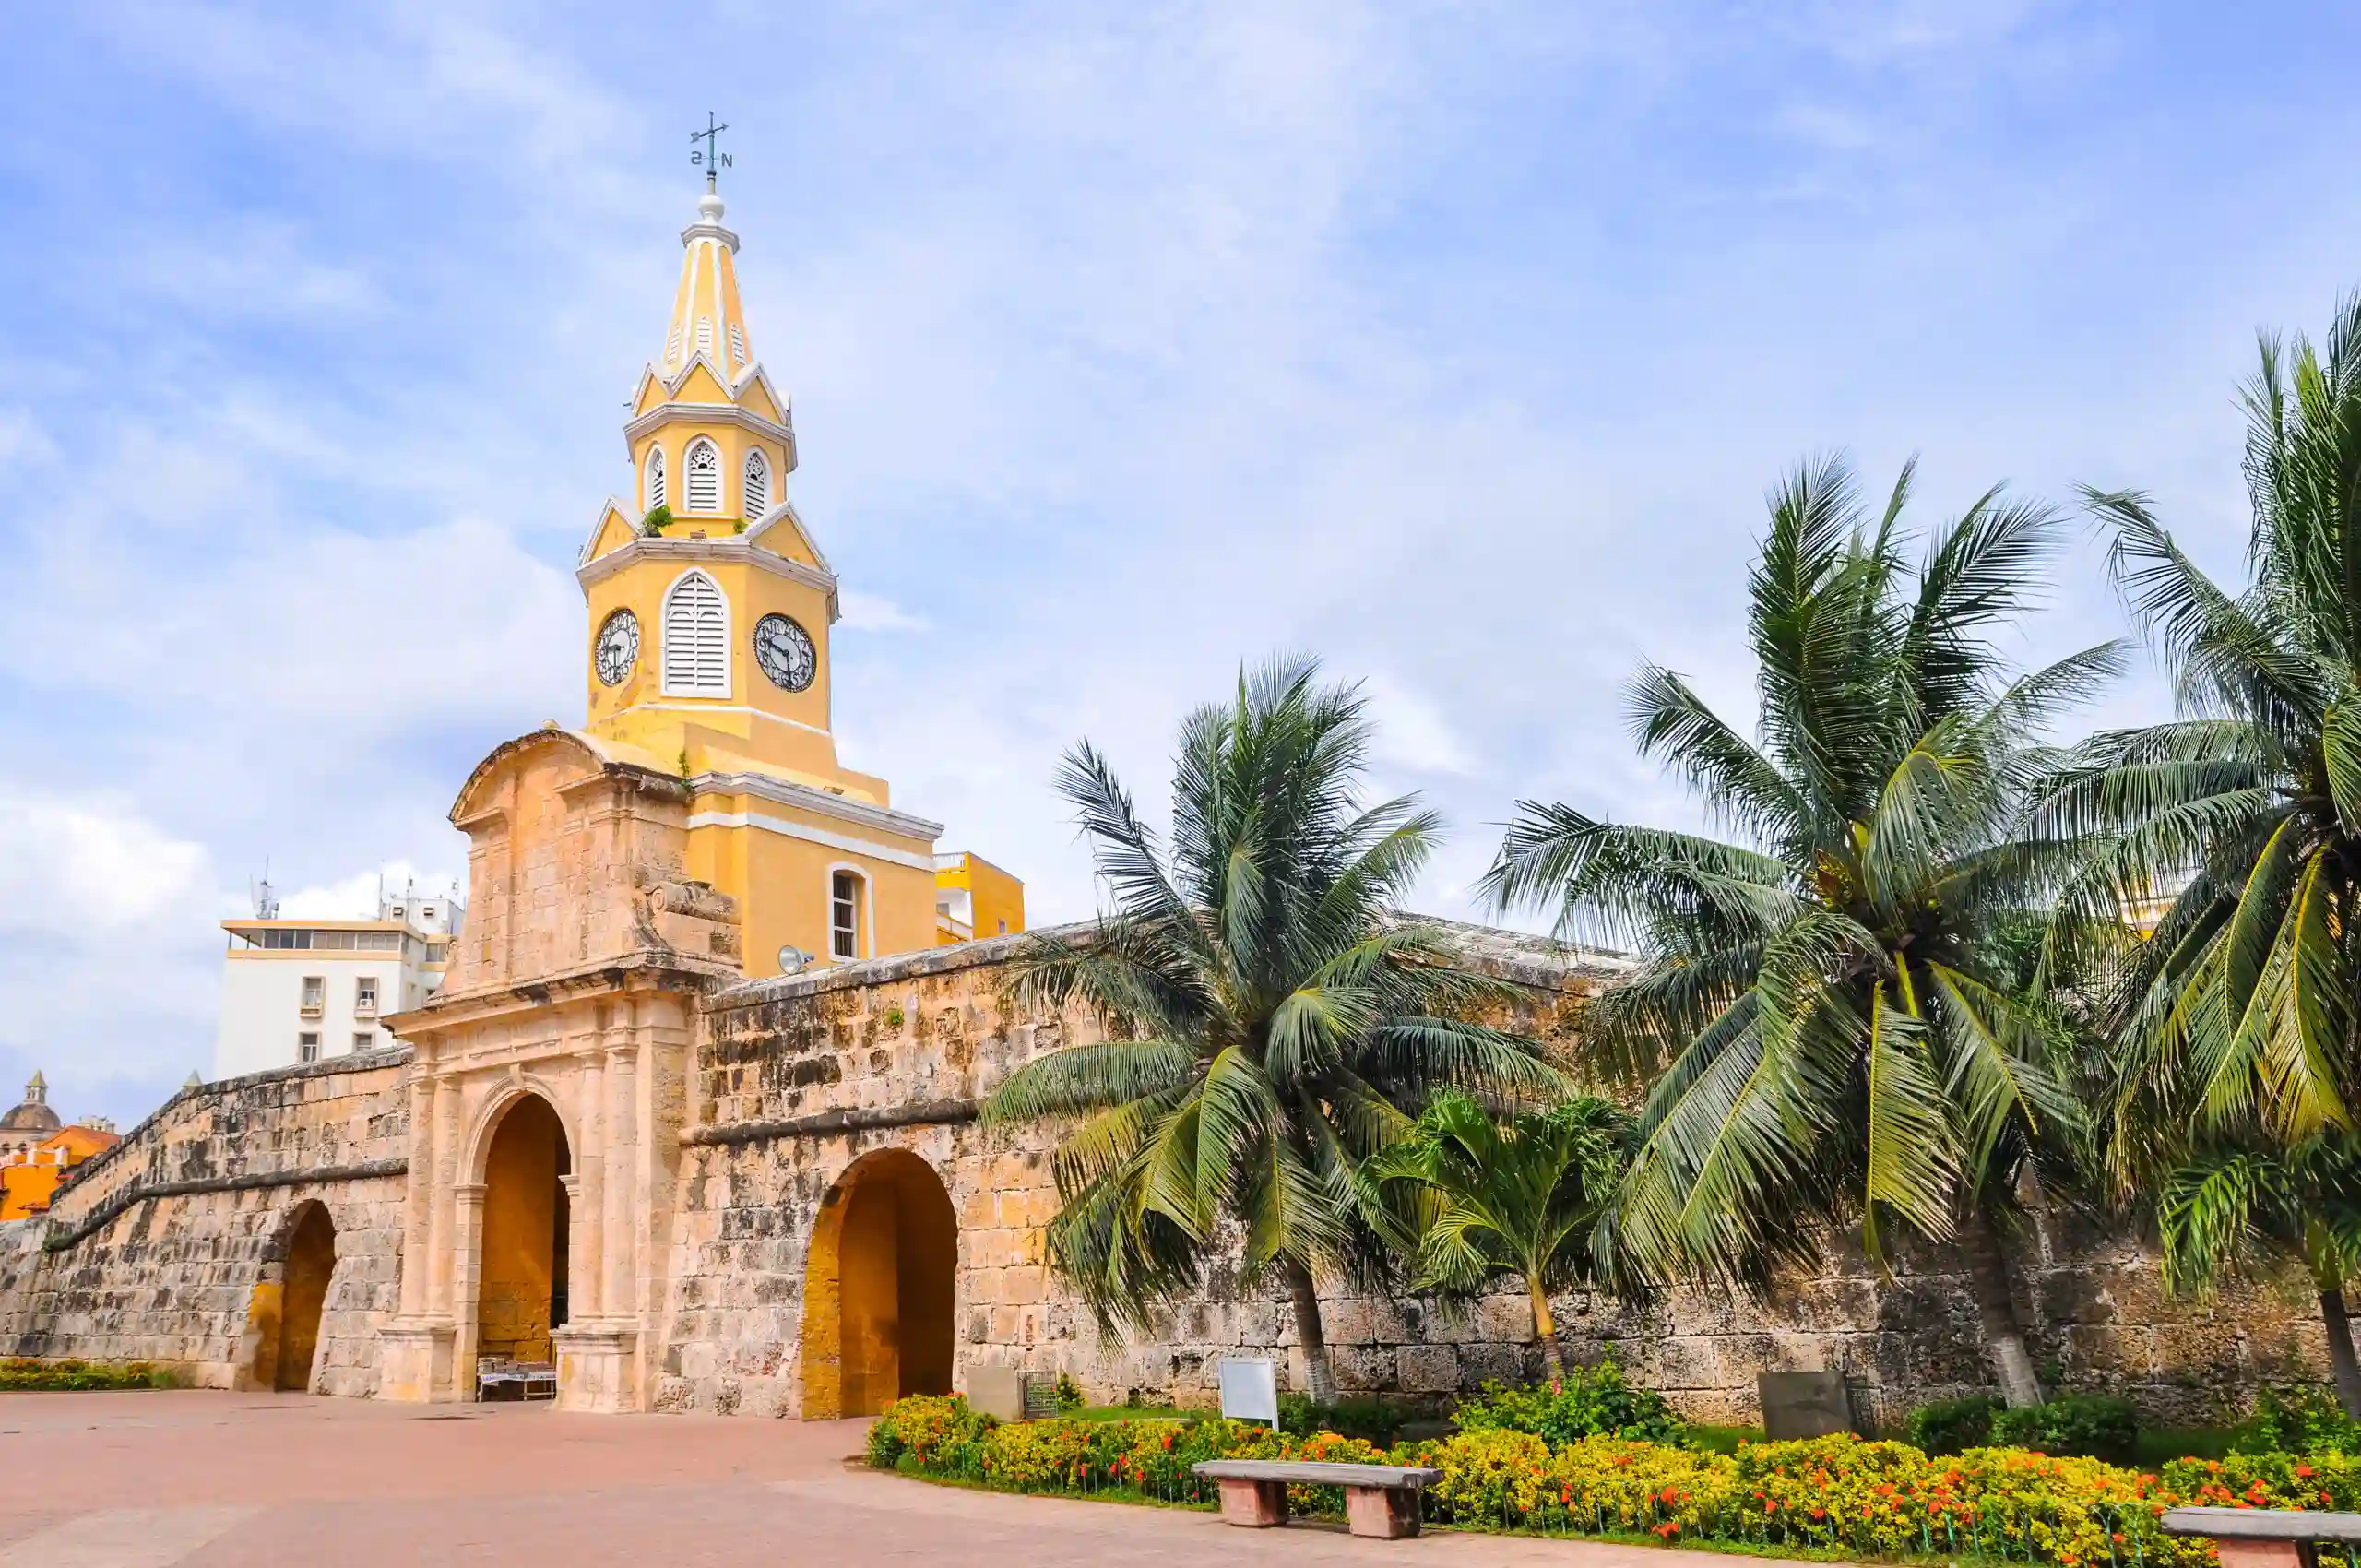 Clock Tower Monument in Cartagena, Colombia